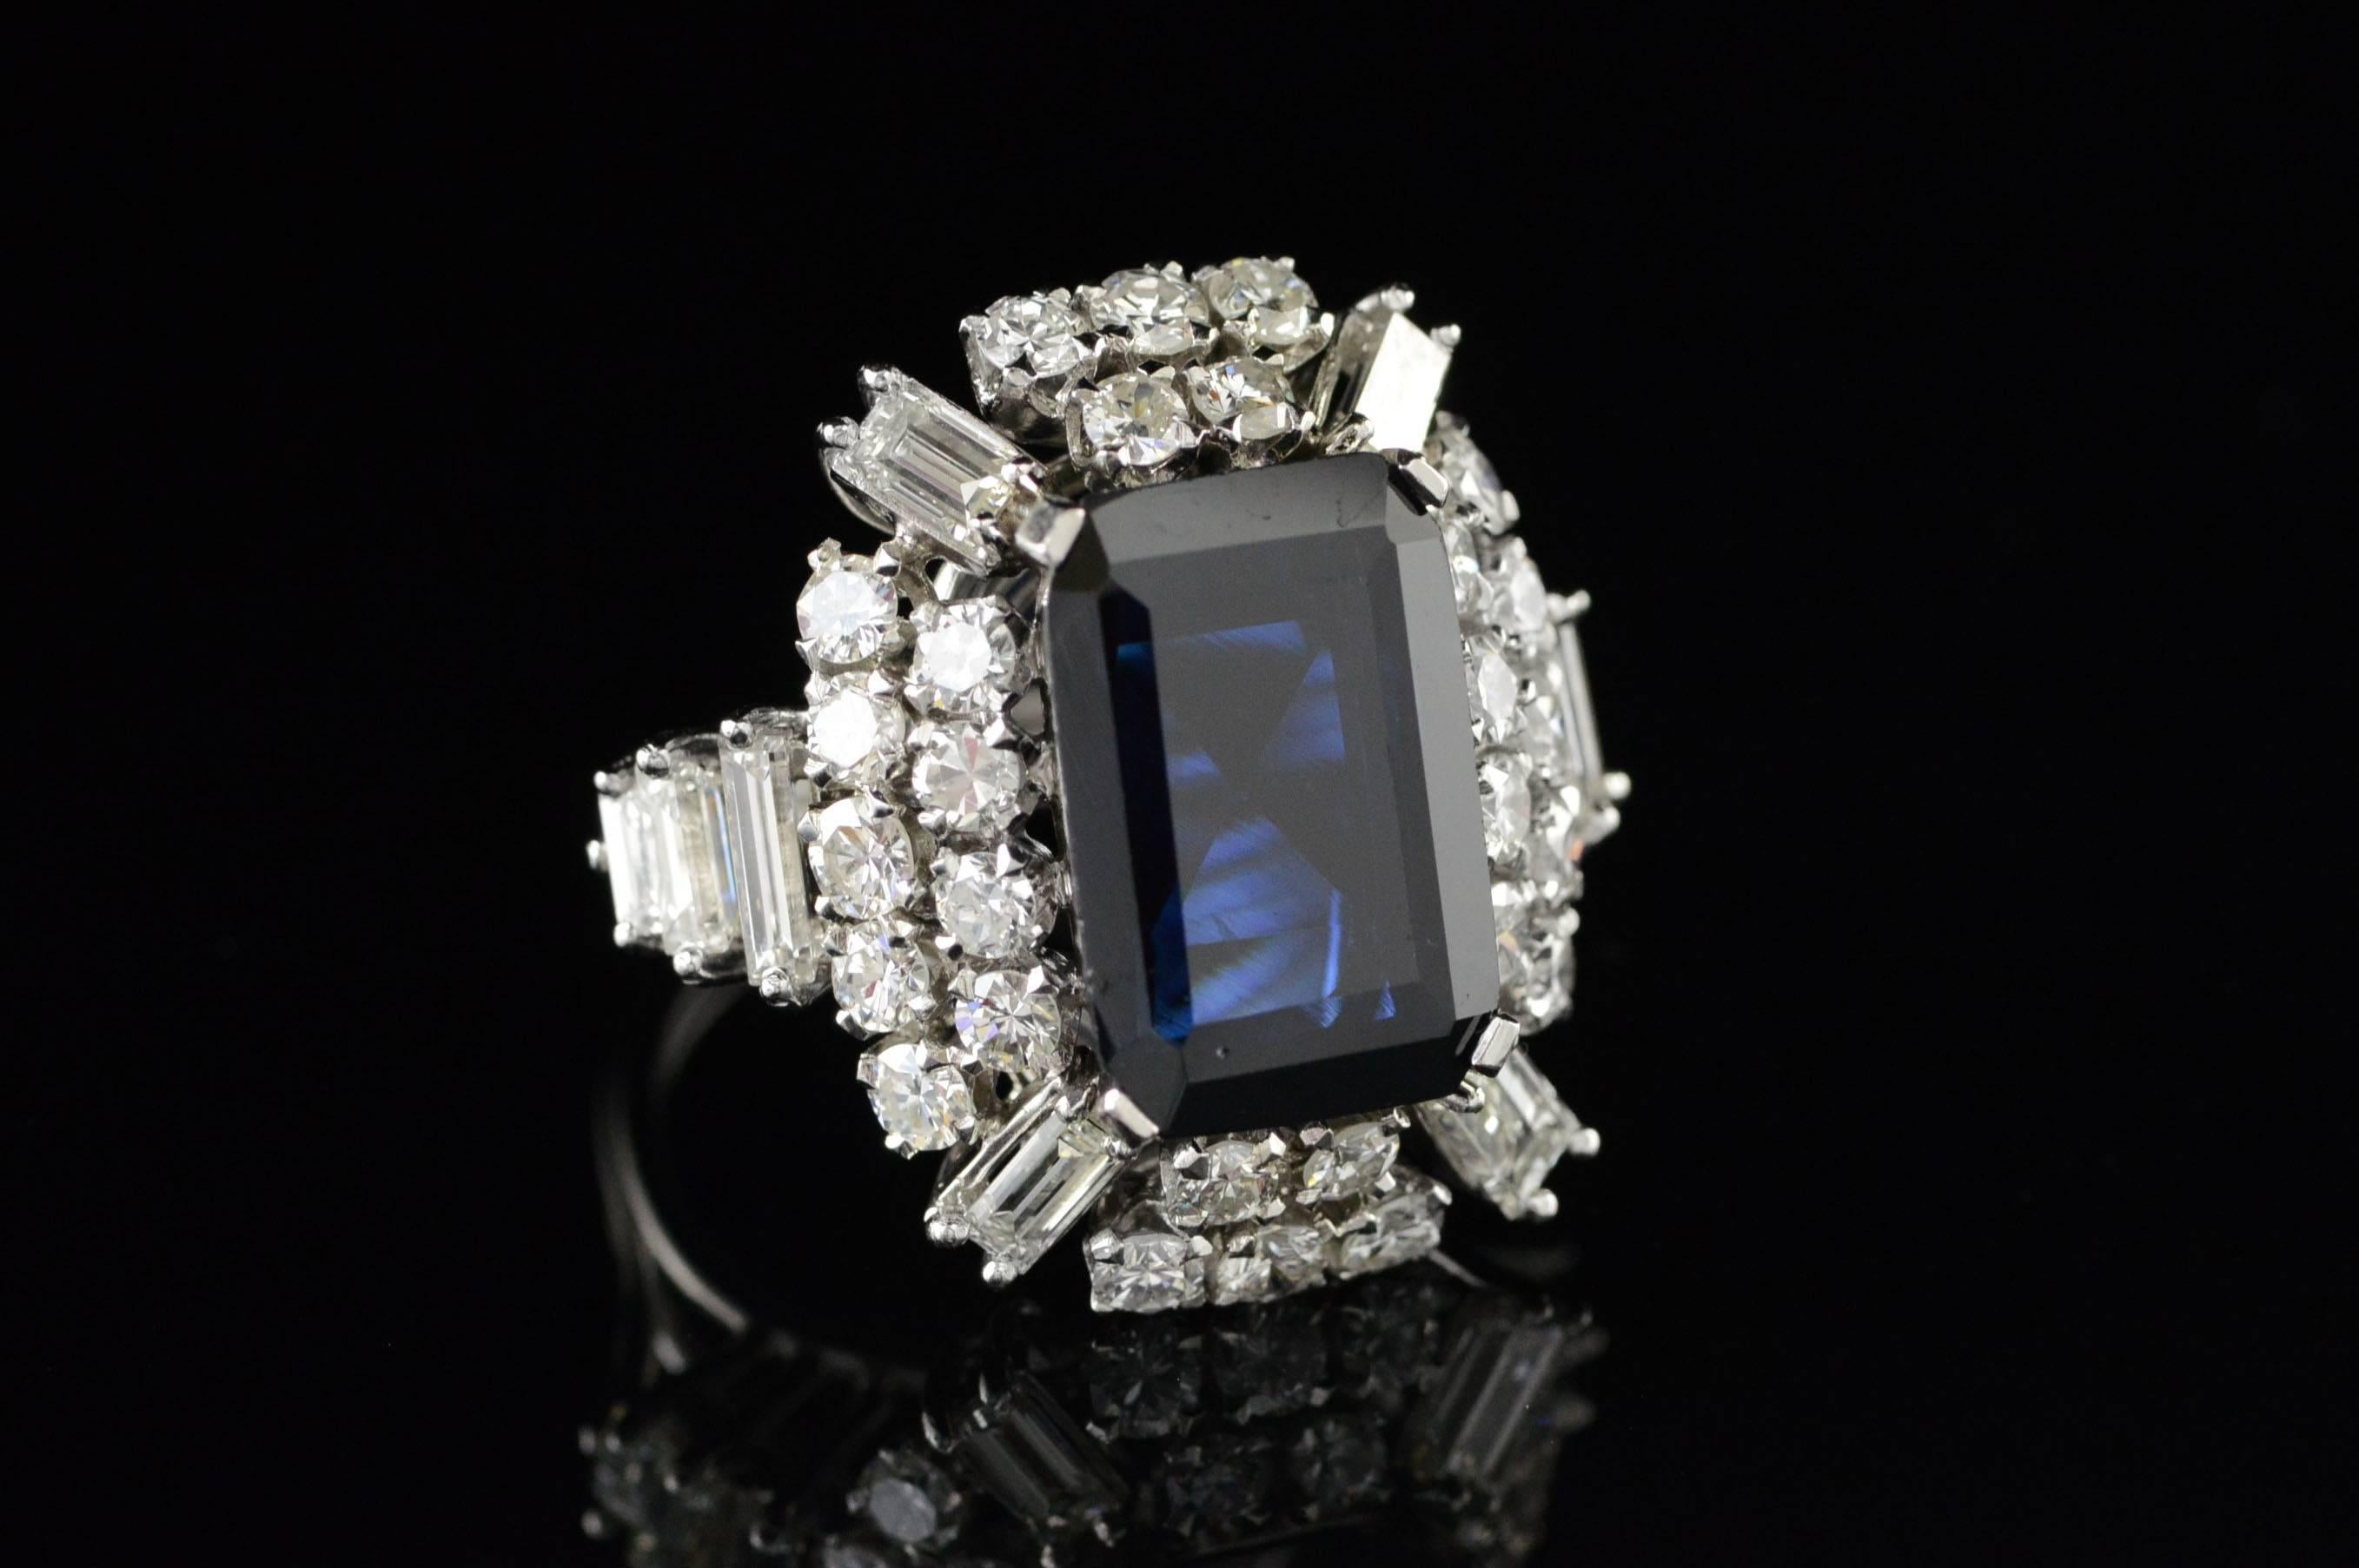 This incredible statement ring demands attention with its impressive size and classical Art Deco stylings. The center stone is a massive Sapphire of over 8 carats flanked by over 4 carats of round brilliant and baguette diamonds.
Fit for a red